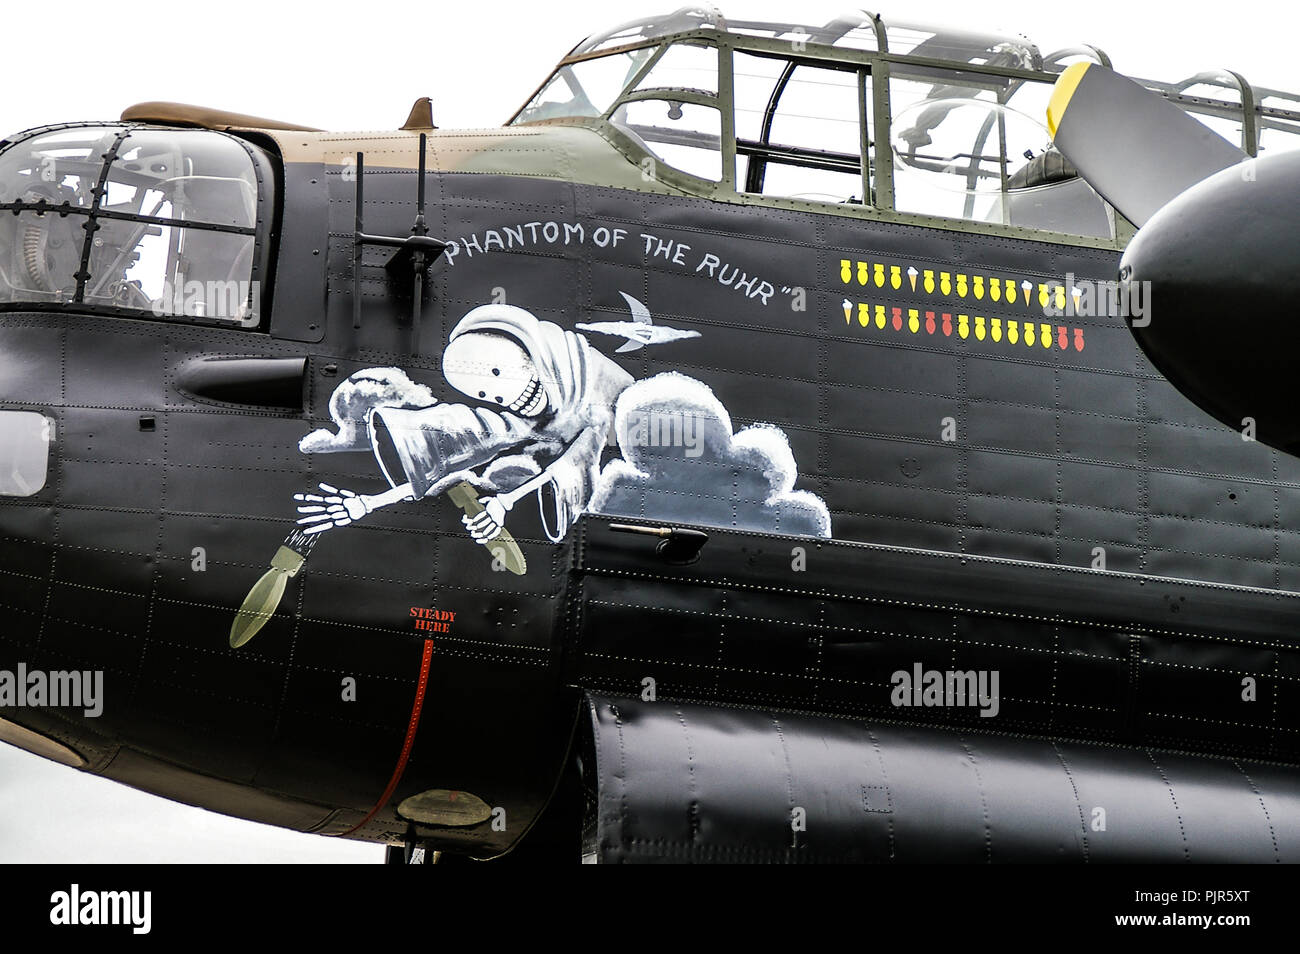 Royal Air Force, RAF Battle of Britain Memorial Flight Avro Lancaster with Phantom of the Ruhr nose art and bombing mission markings. Ghost, bombs Stock Photo